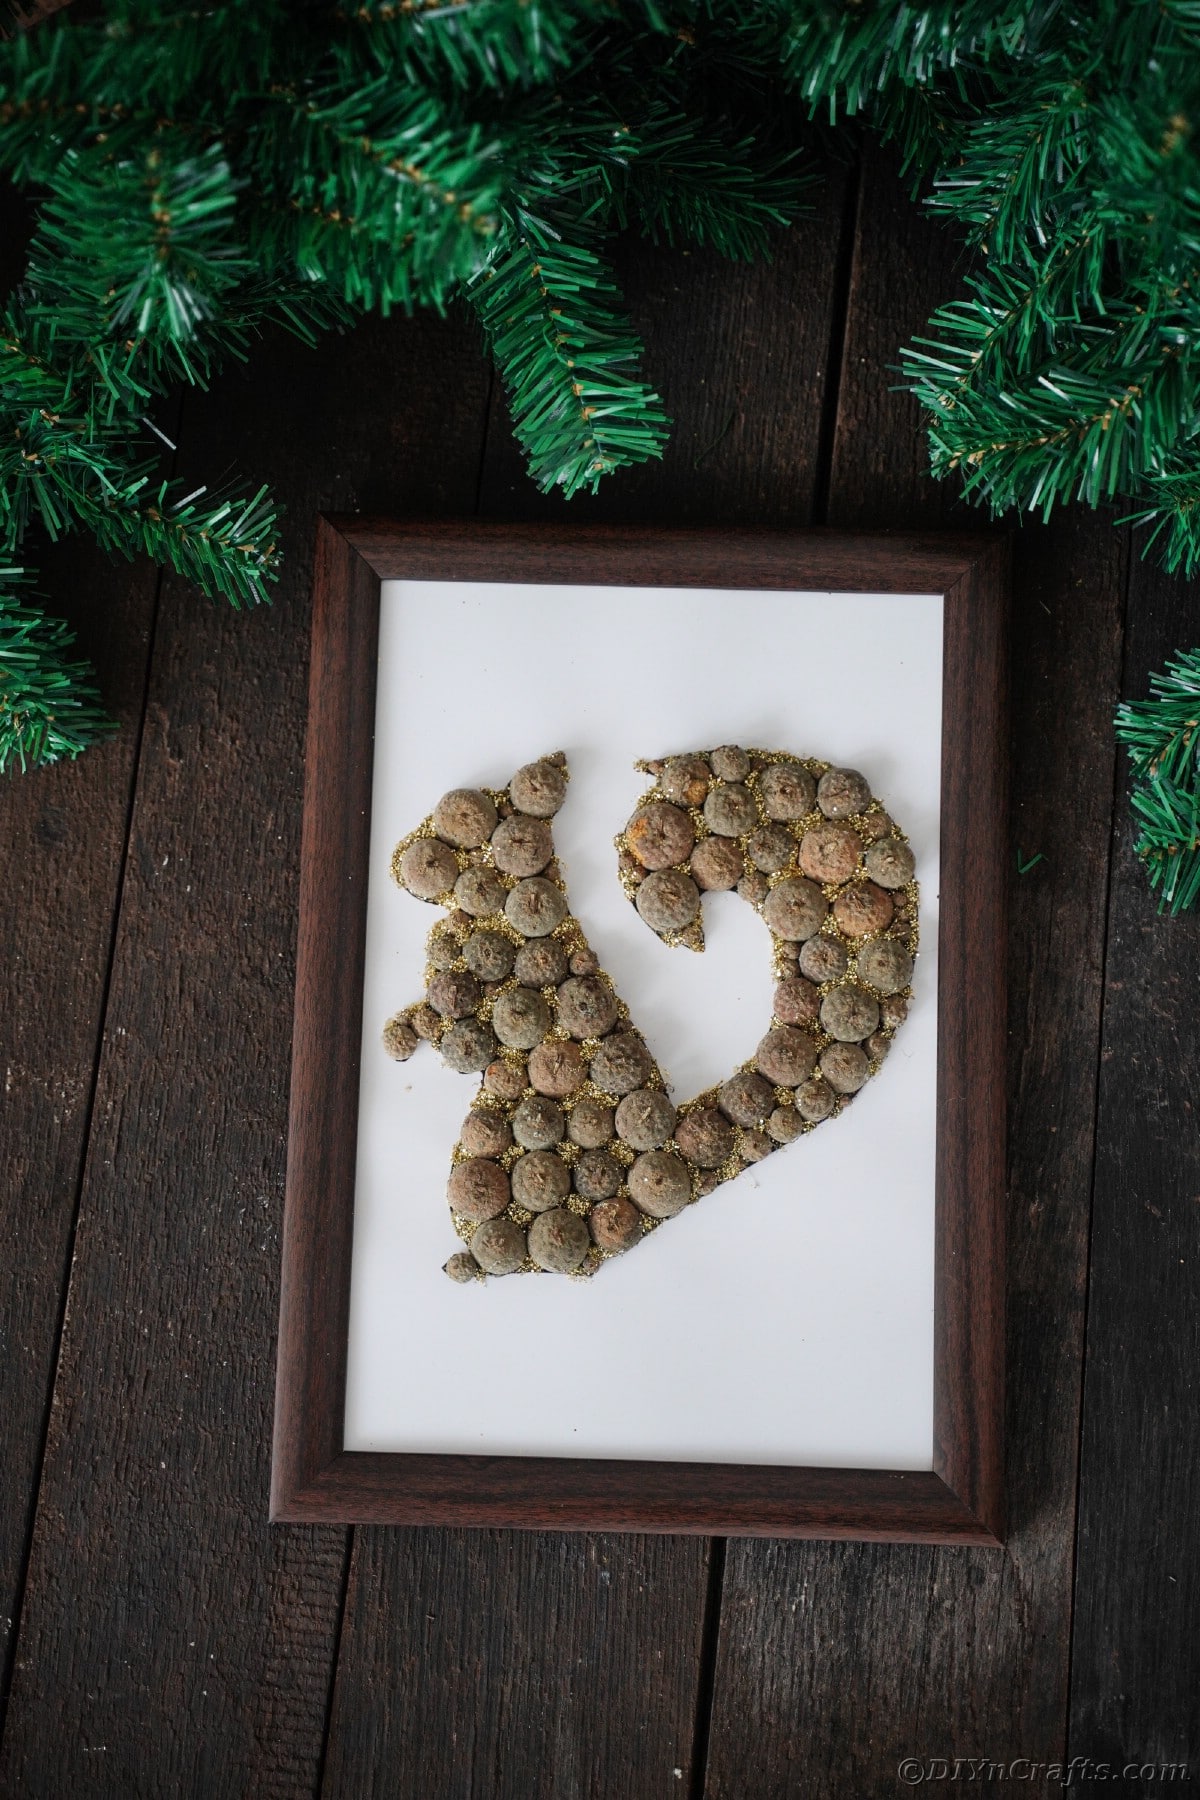 Acorn cap squirrel in frame on wood table with holiday garland